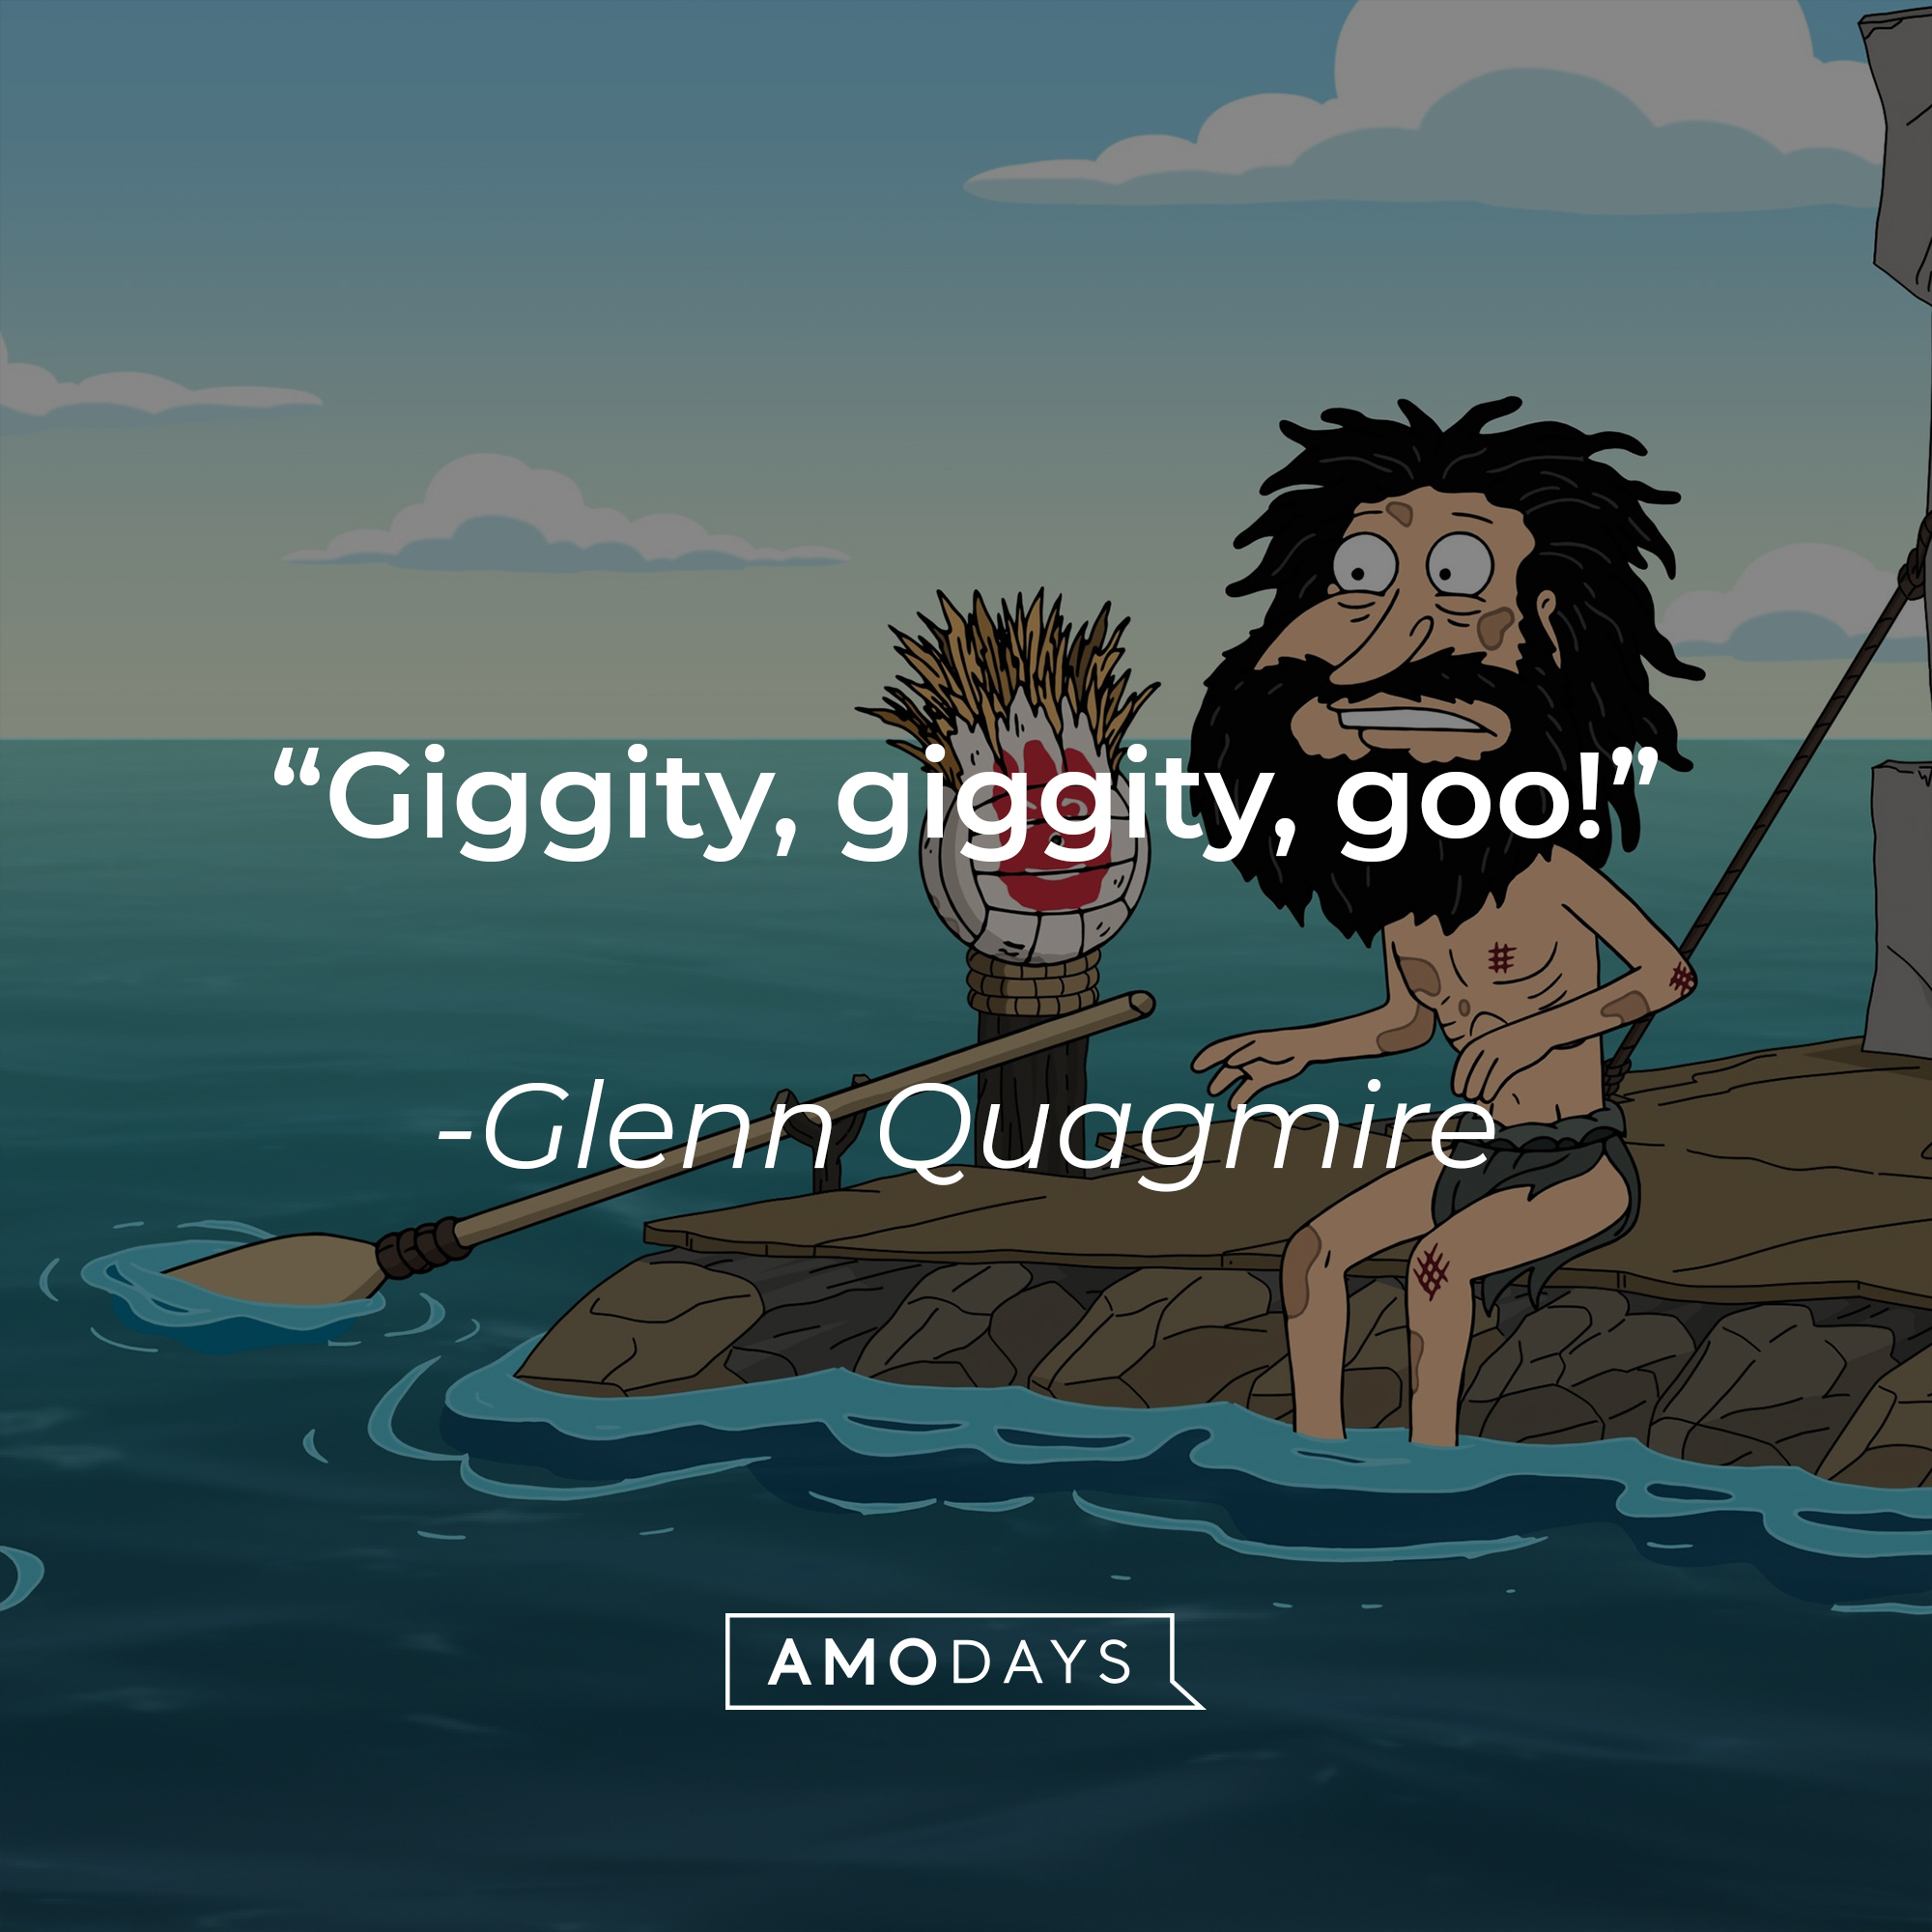 Glenn Quagmire with another character from “Family Guy” and  his quote: “Giggity, giggity, goo!” | Source: facebook.com/FamilyGuy